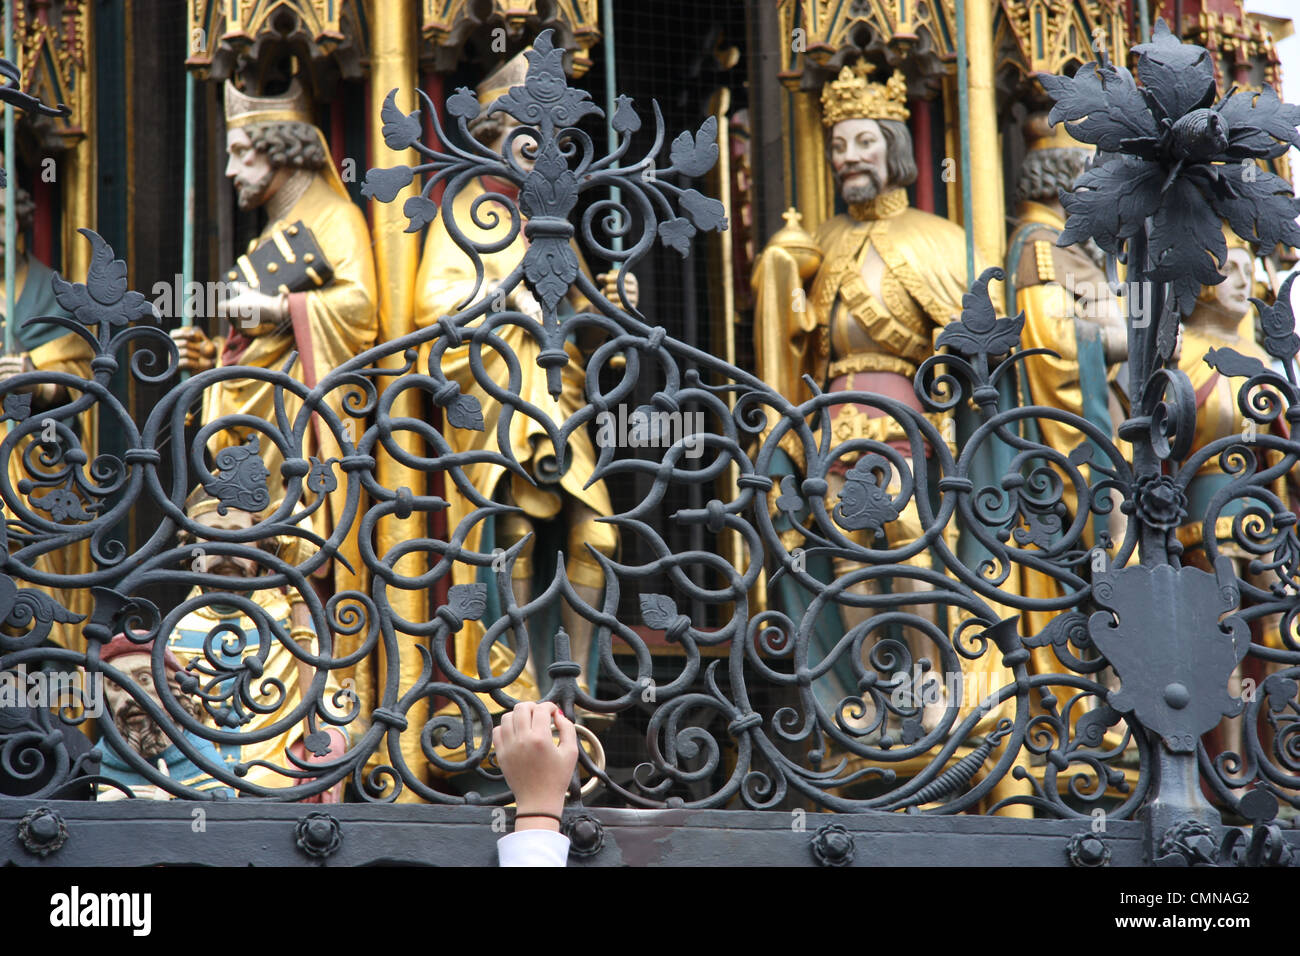 Tourist rubs the brass ring set in the wrought iron fence of the beautiful fountain in the market square at Nuremberg, Germany Stock Photo